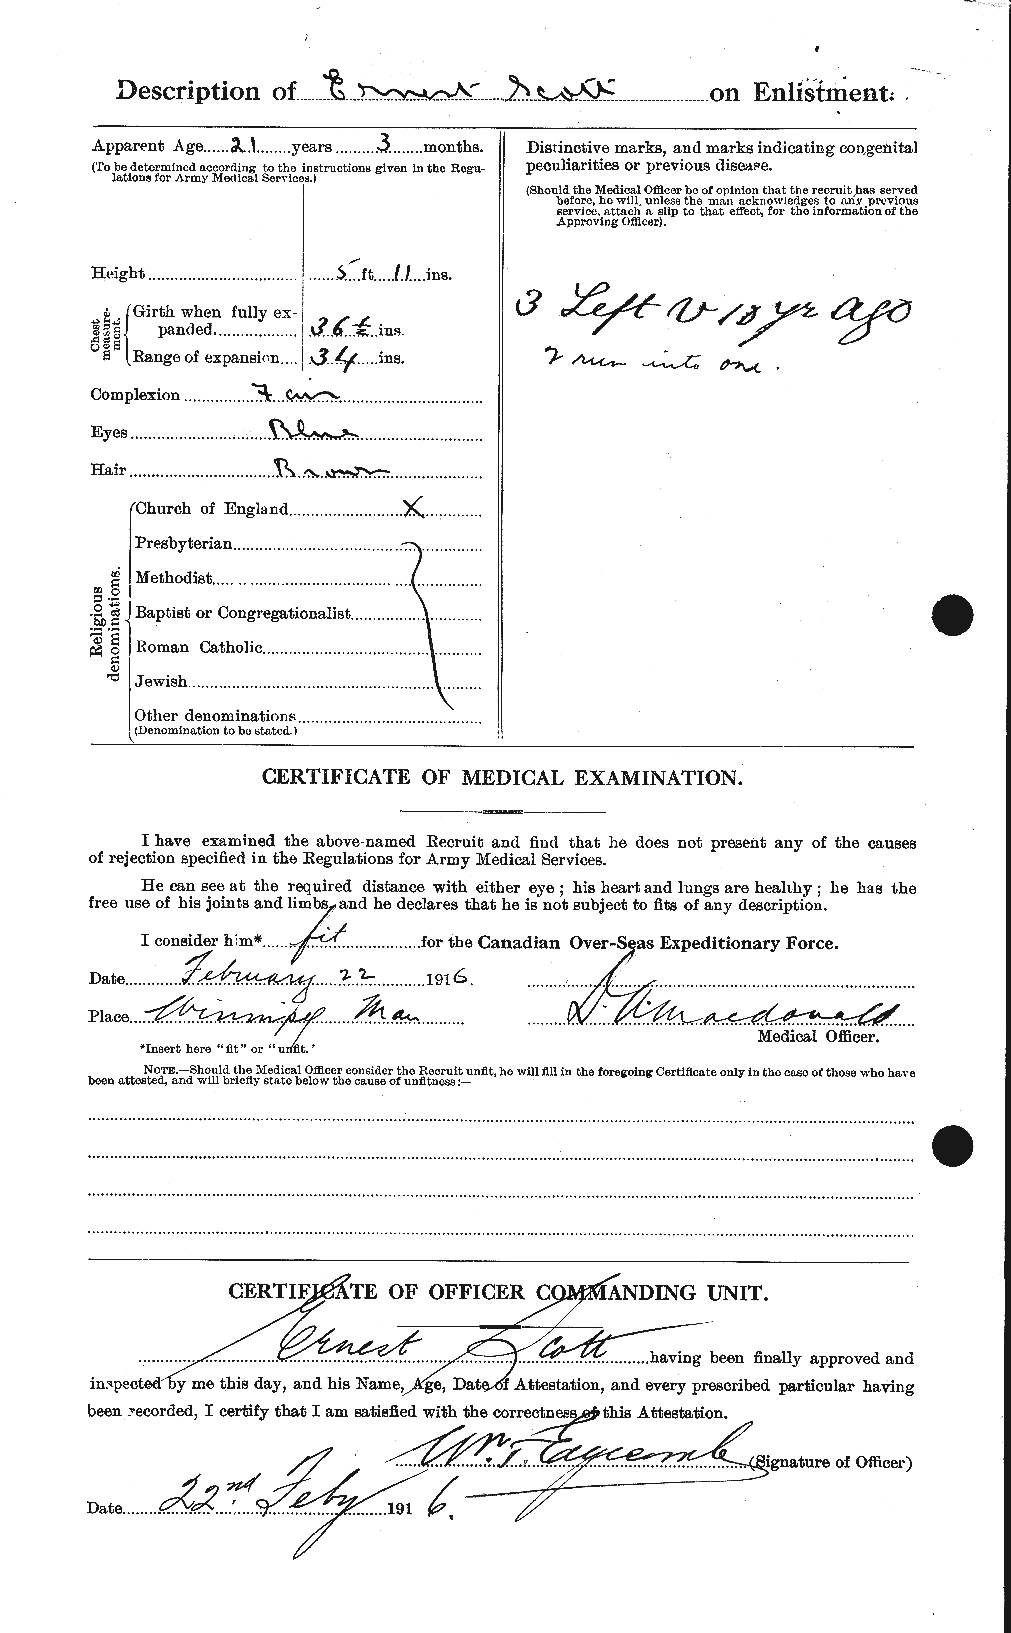 Personnel Records of the First World War - CEF 085018b